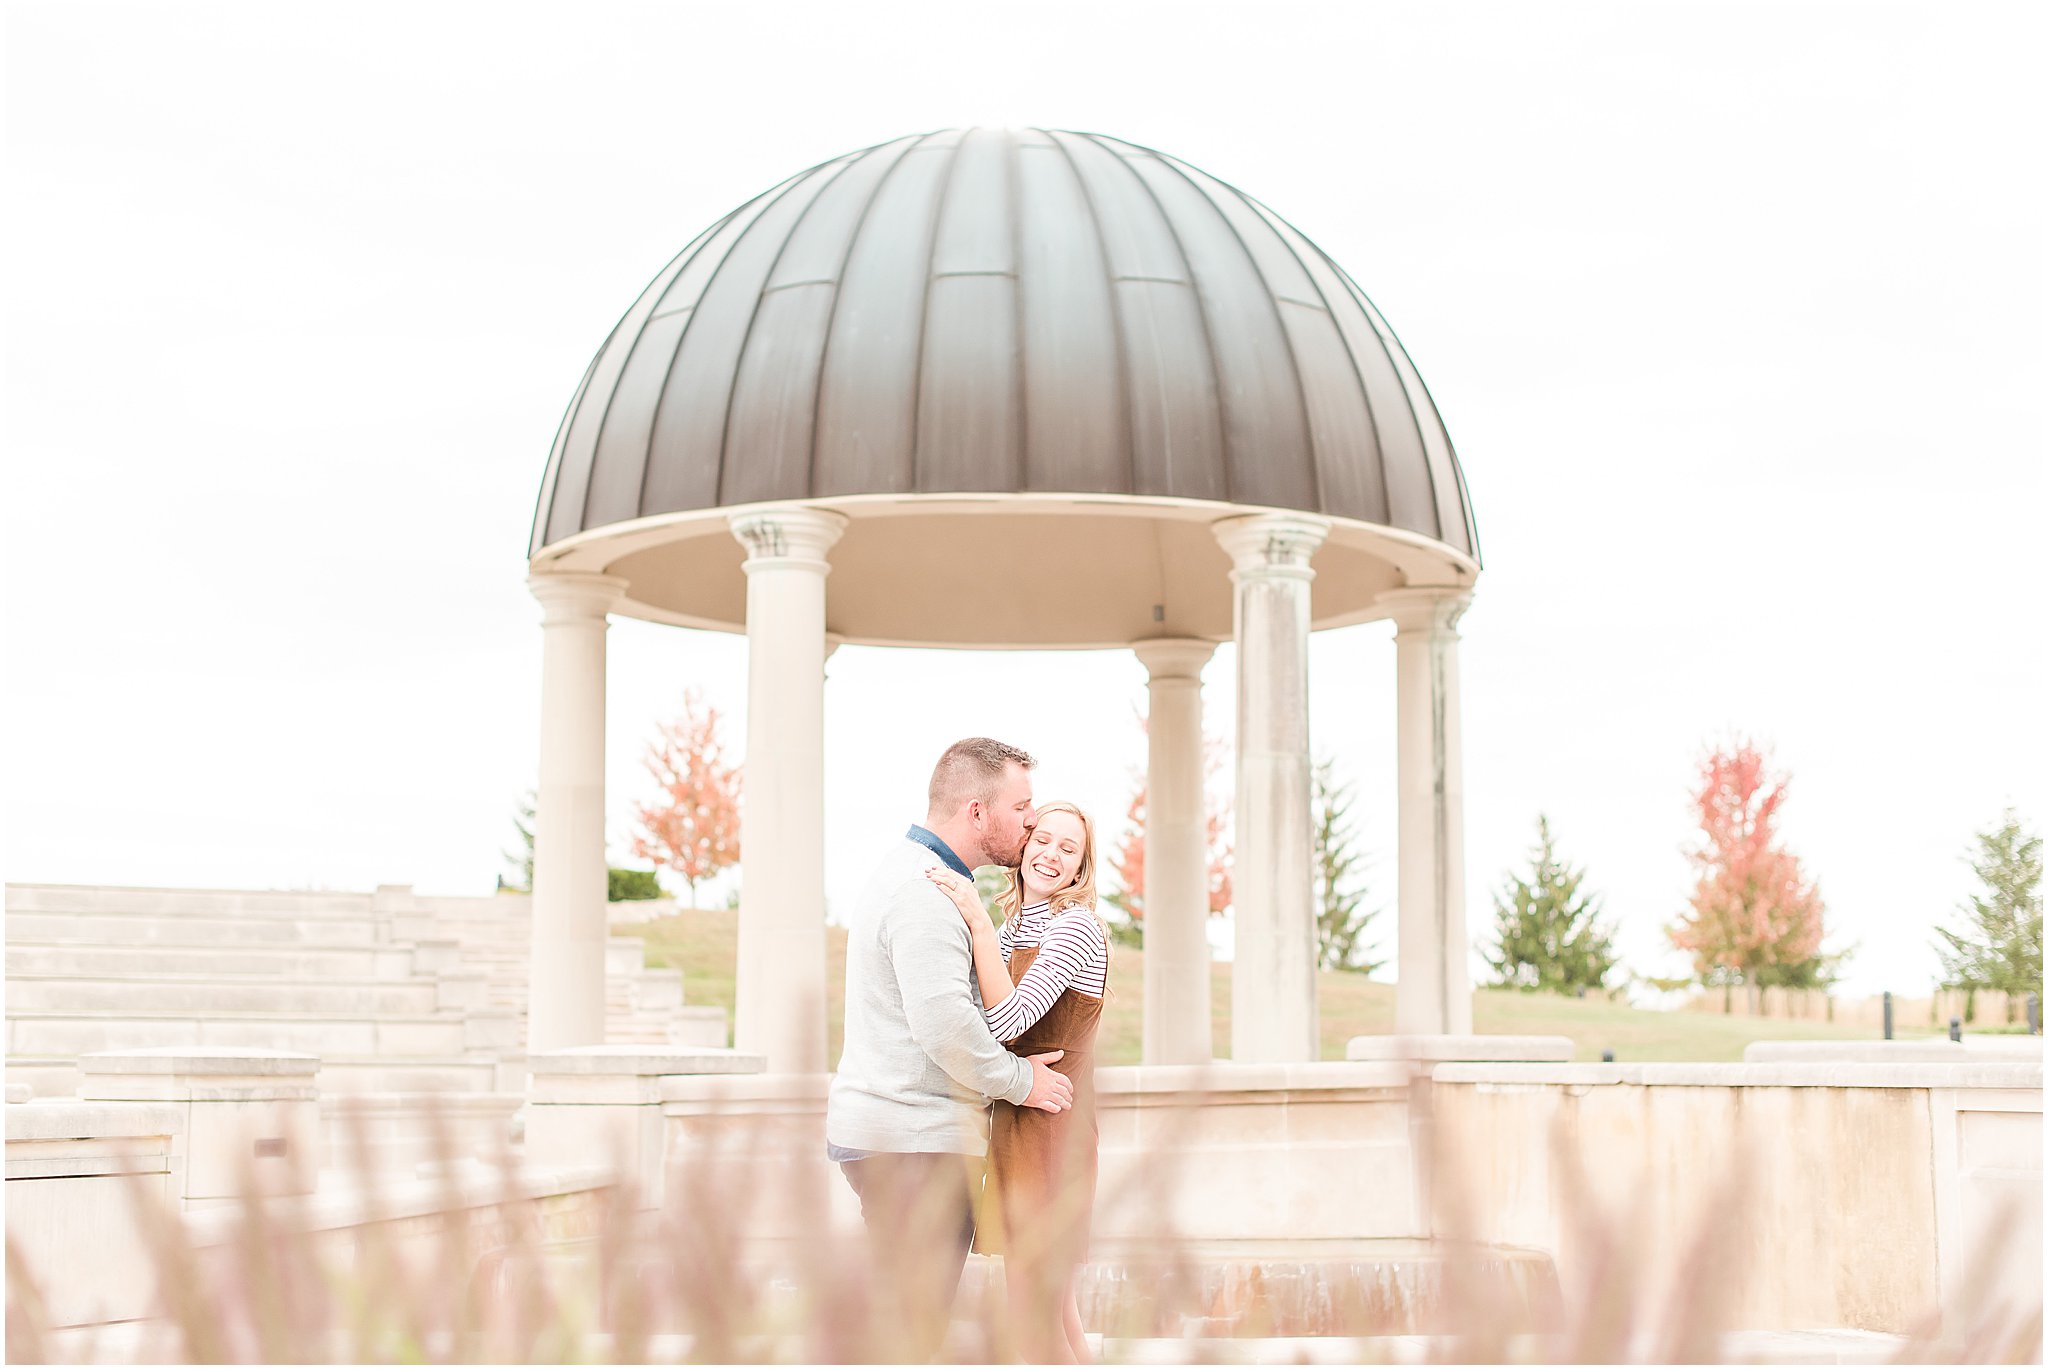 Couples nuzzling and laughing during Coxhall Gardens engagement session